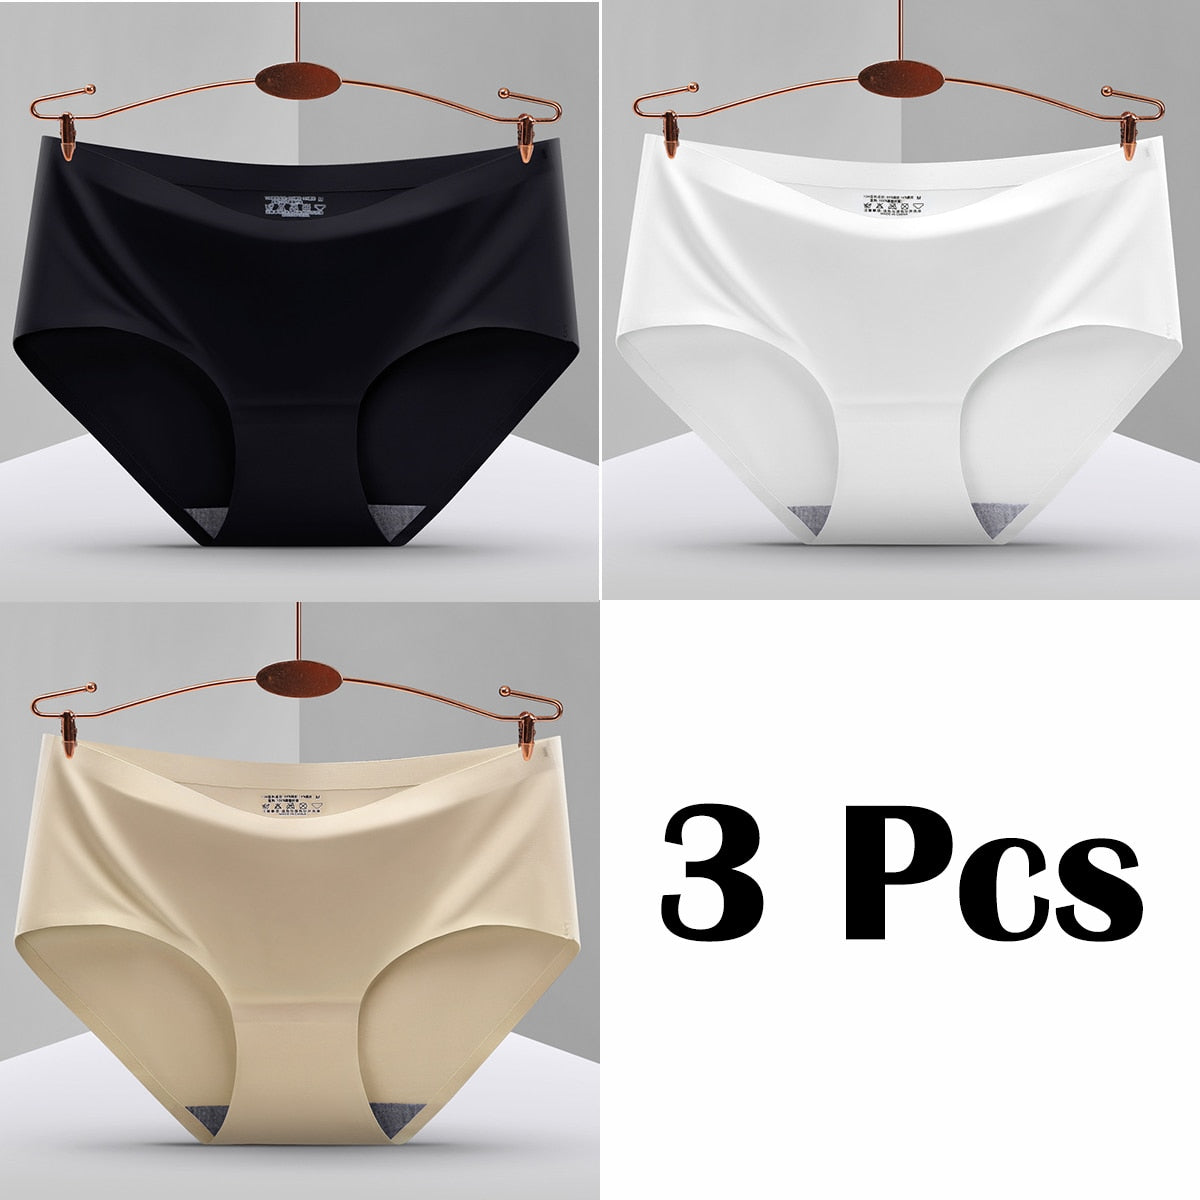 3Pcs New In Seamless Ice Silk Briefs Underwear Women Solid Color Intimate Panties Ultra Thin Breathable Lingerie For Ladies